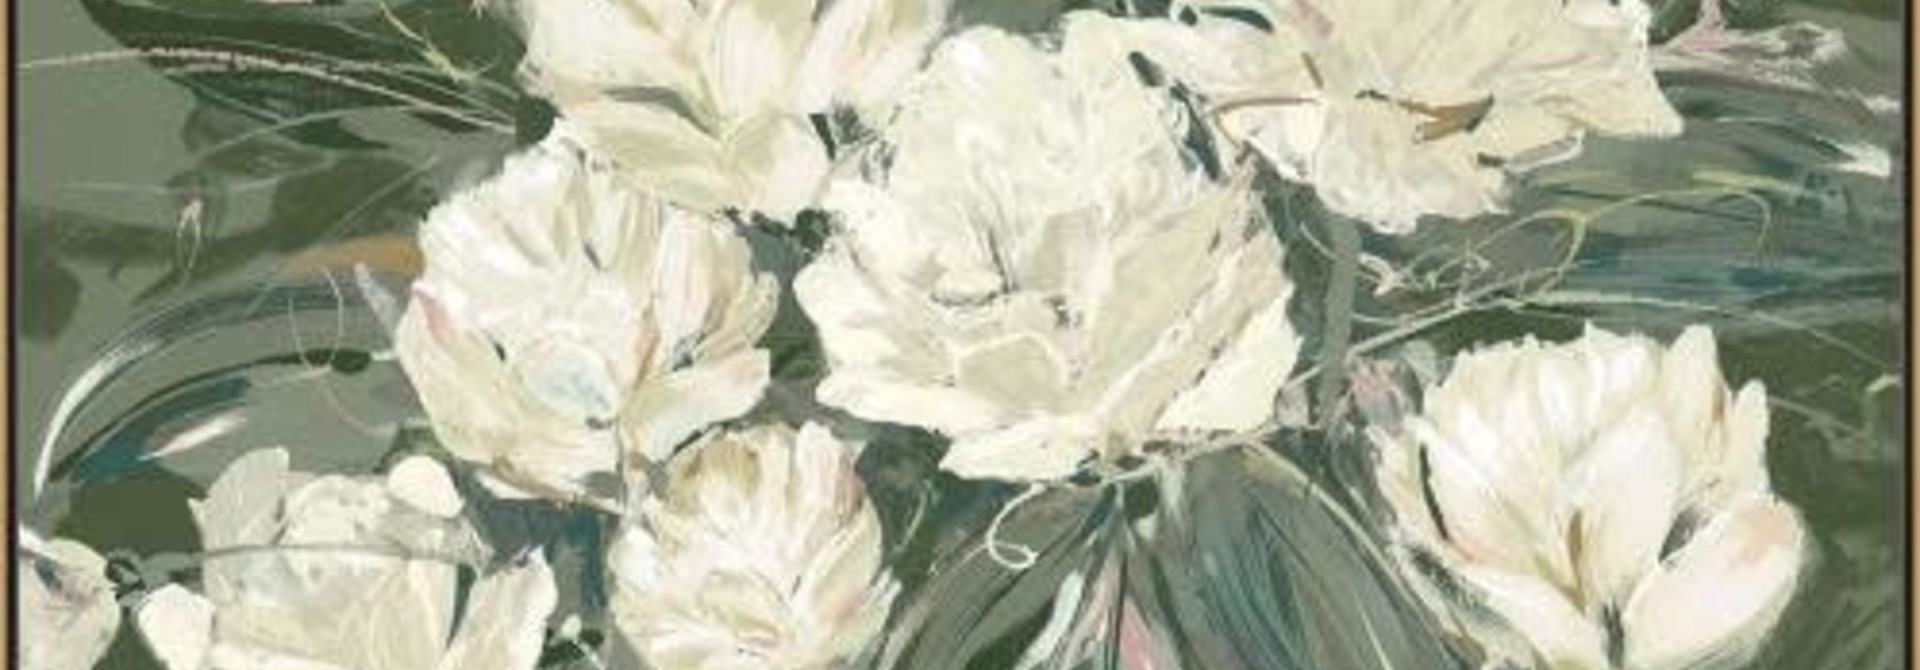 Blossom Medley IV | The Art Collection, Sage - 31.25 Inch x 31.25 Inch